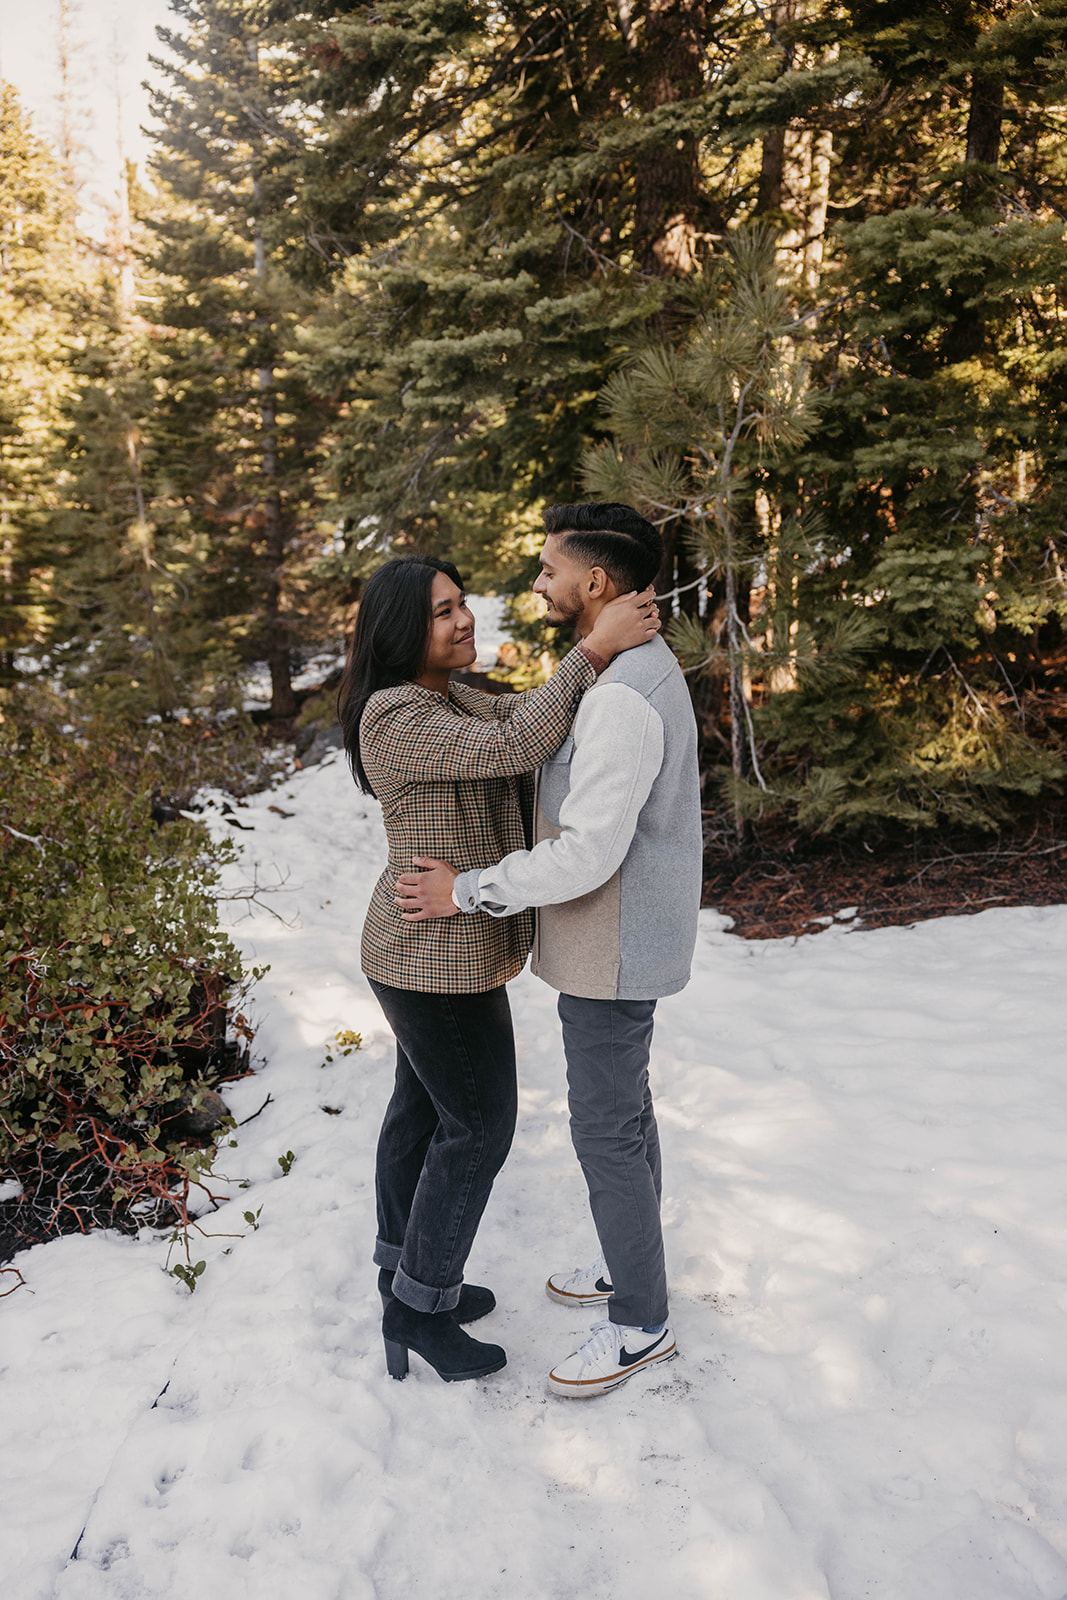 A Magical Crystal Bay Surprise Proposal